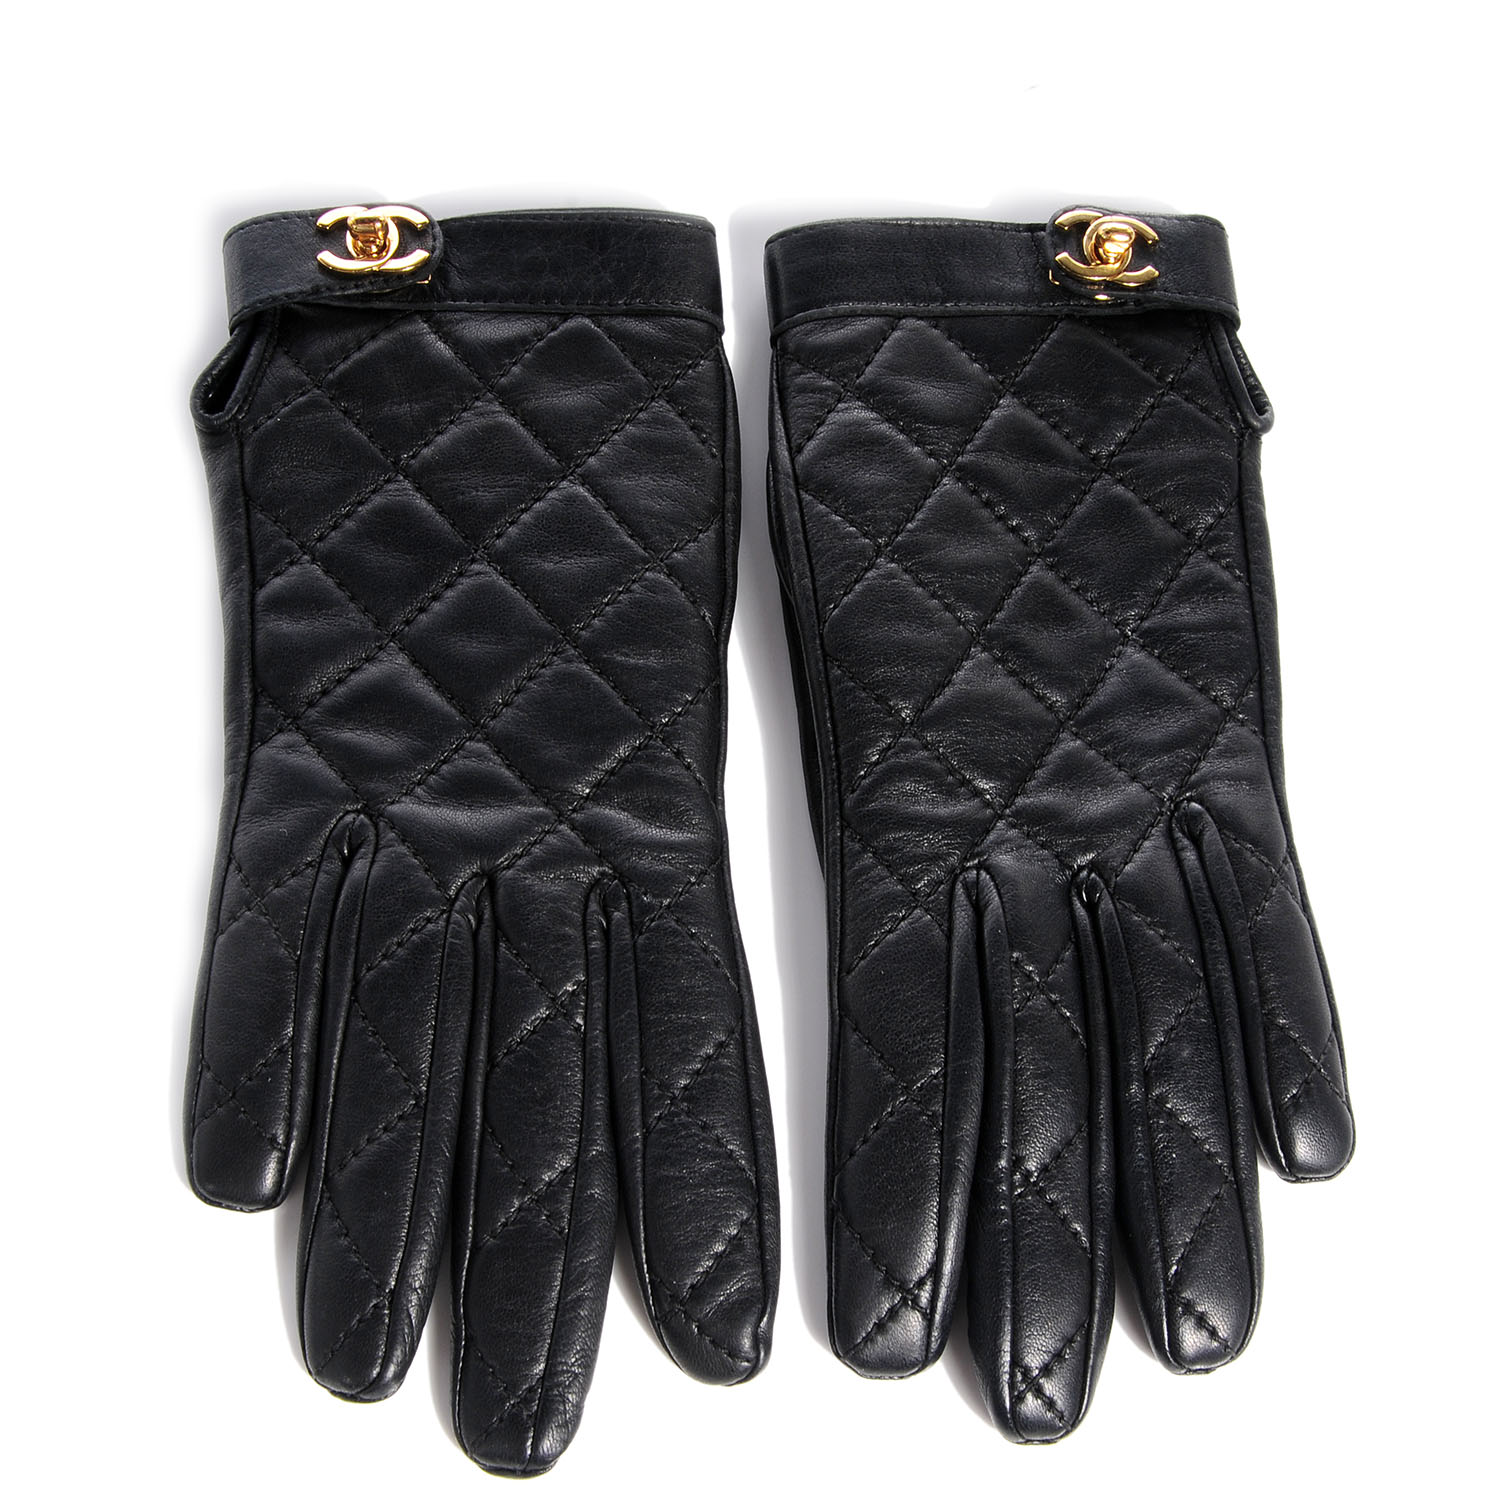 CHANEL Lambskin Quilted Gloves Black 6.5 70702